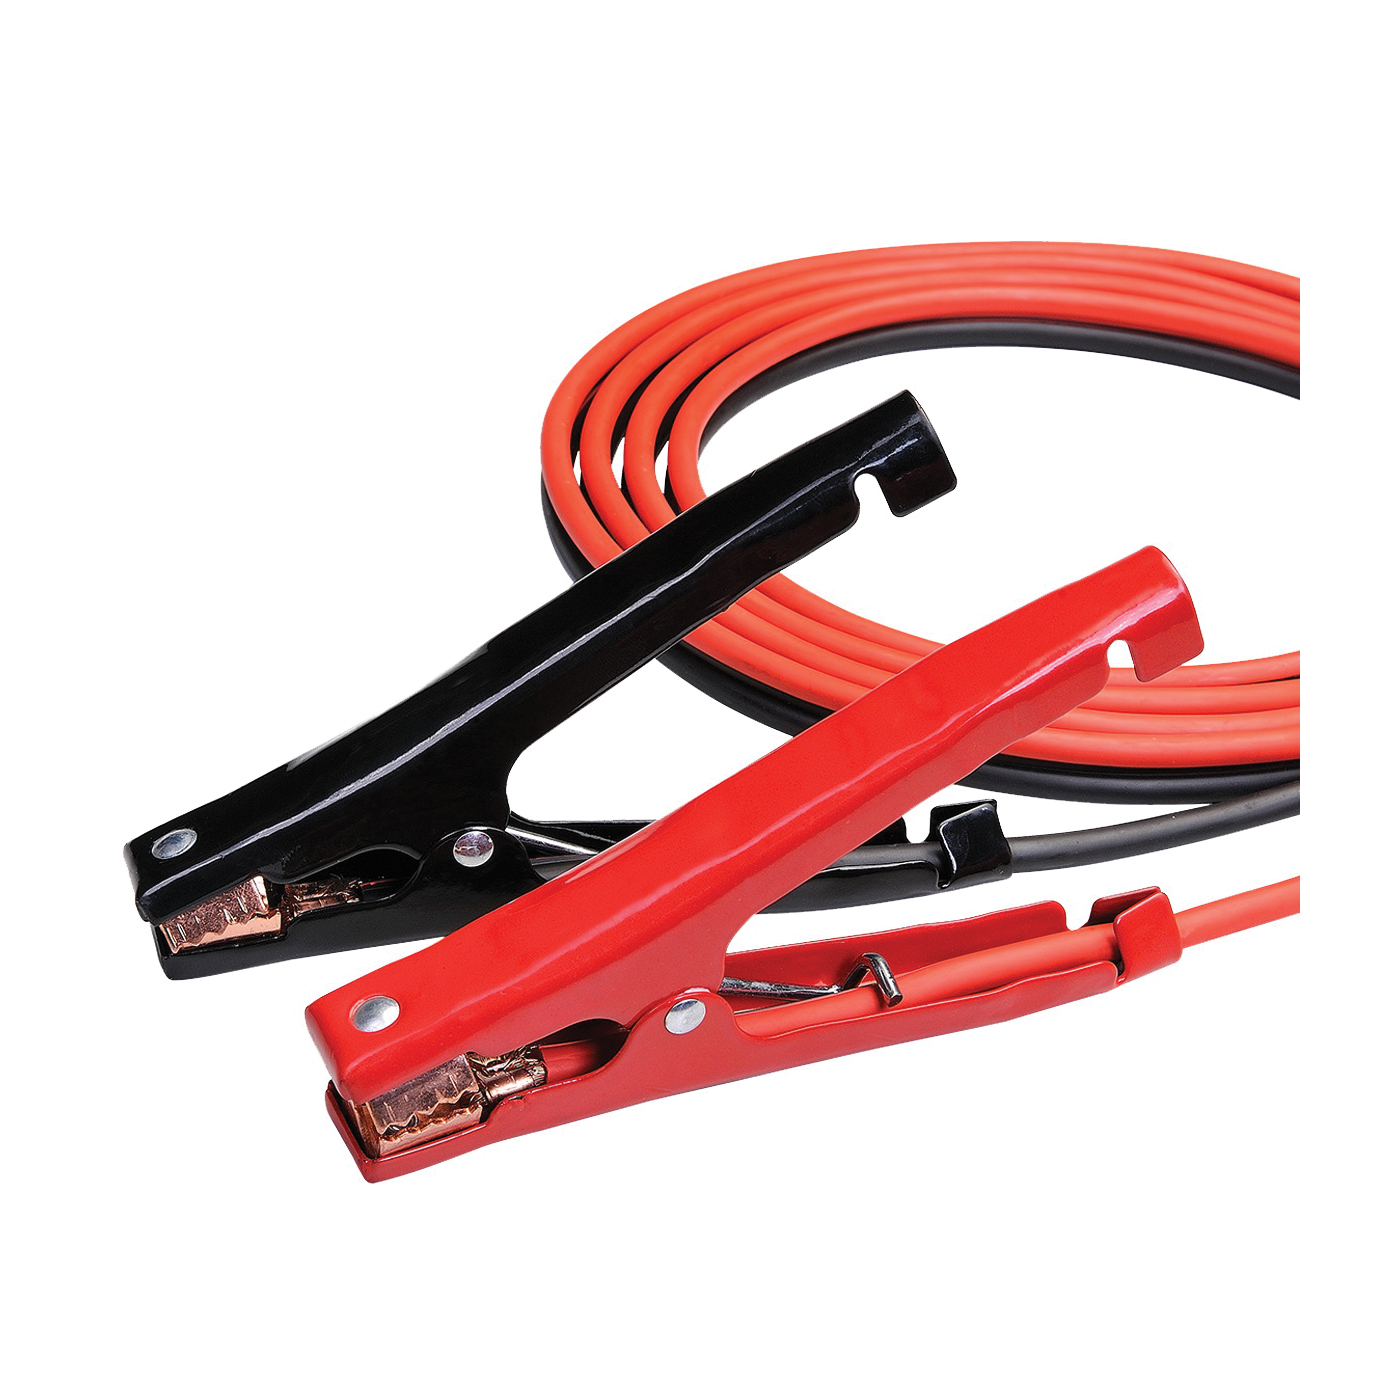 Booster Cable, 8 AWG Wire, 4-Conductor, Clamp, Clamp, Stranded, Red/Black Sheath